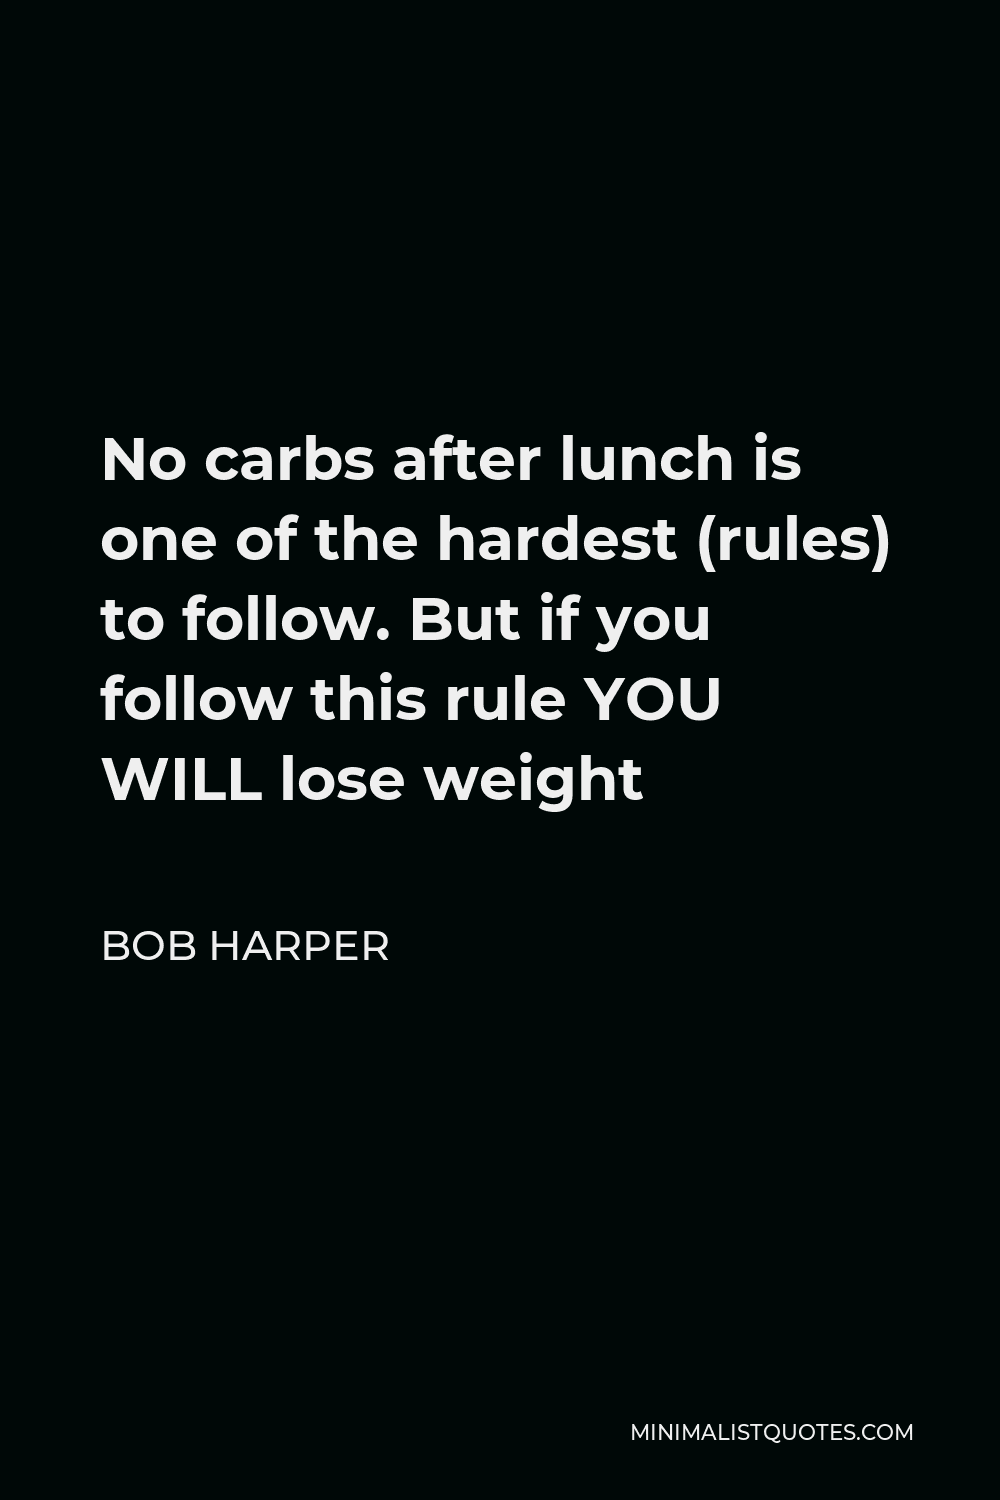 Bob Harper Quote - No carbs after lunch is one of the hardest (rules) to follow. But if you follow this rule YOU WILL lose weight